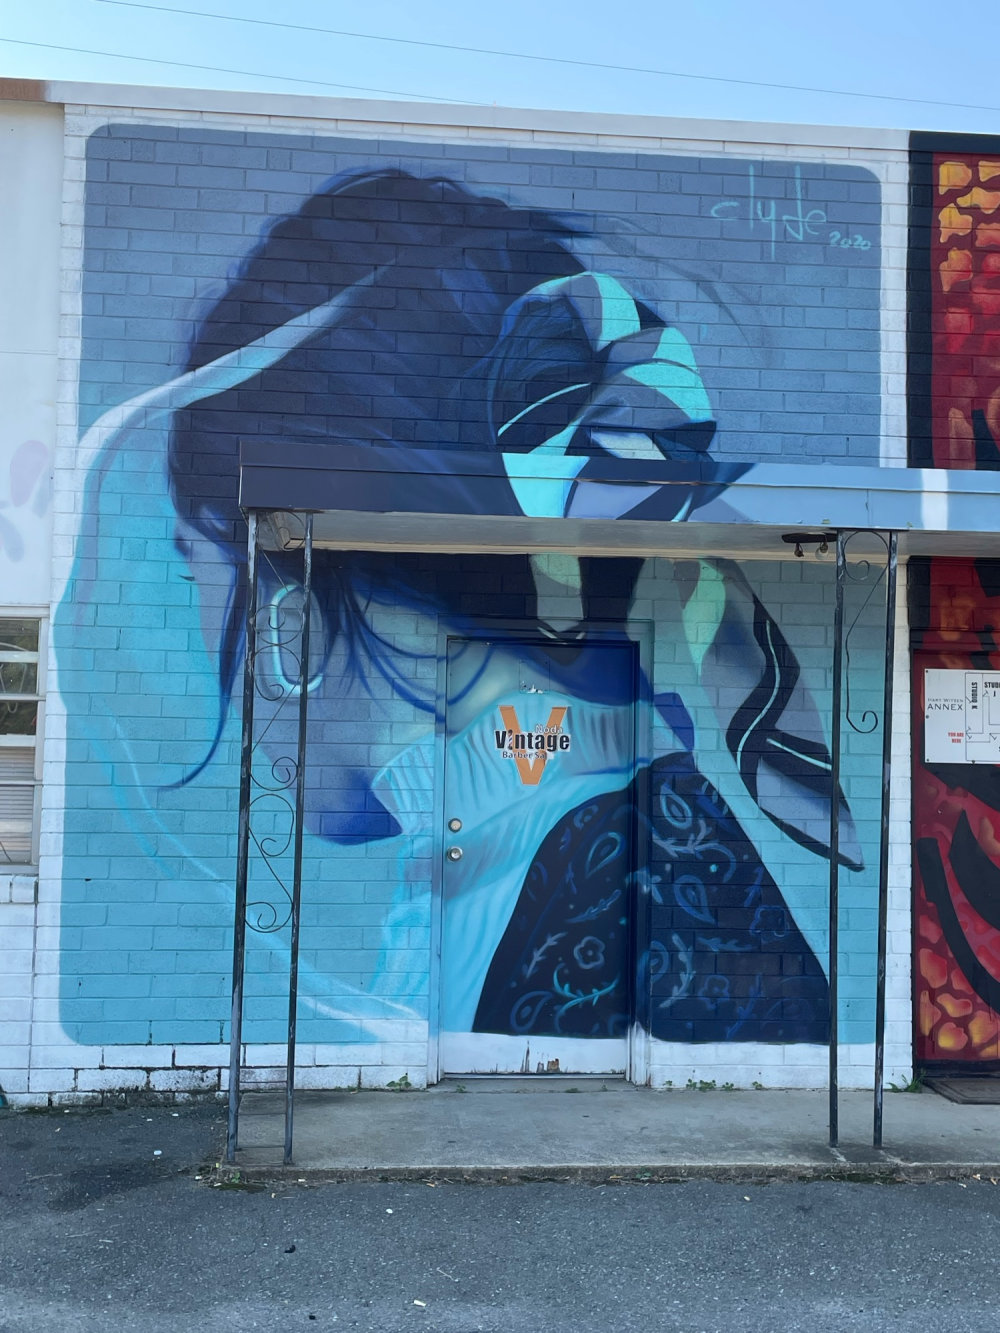 mural in Charlotte by artist Clyde.